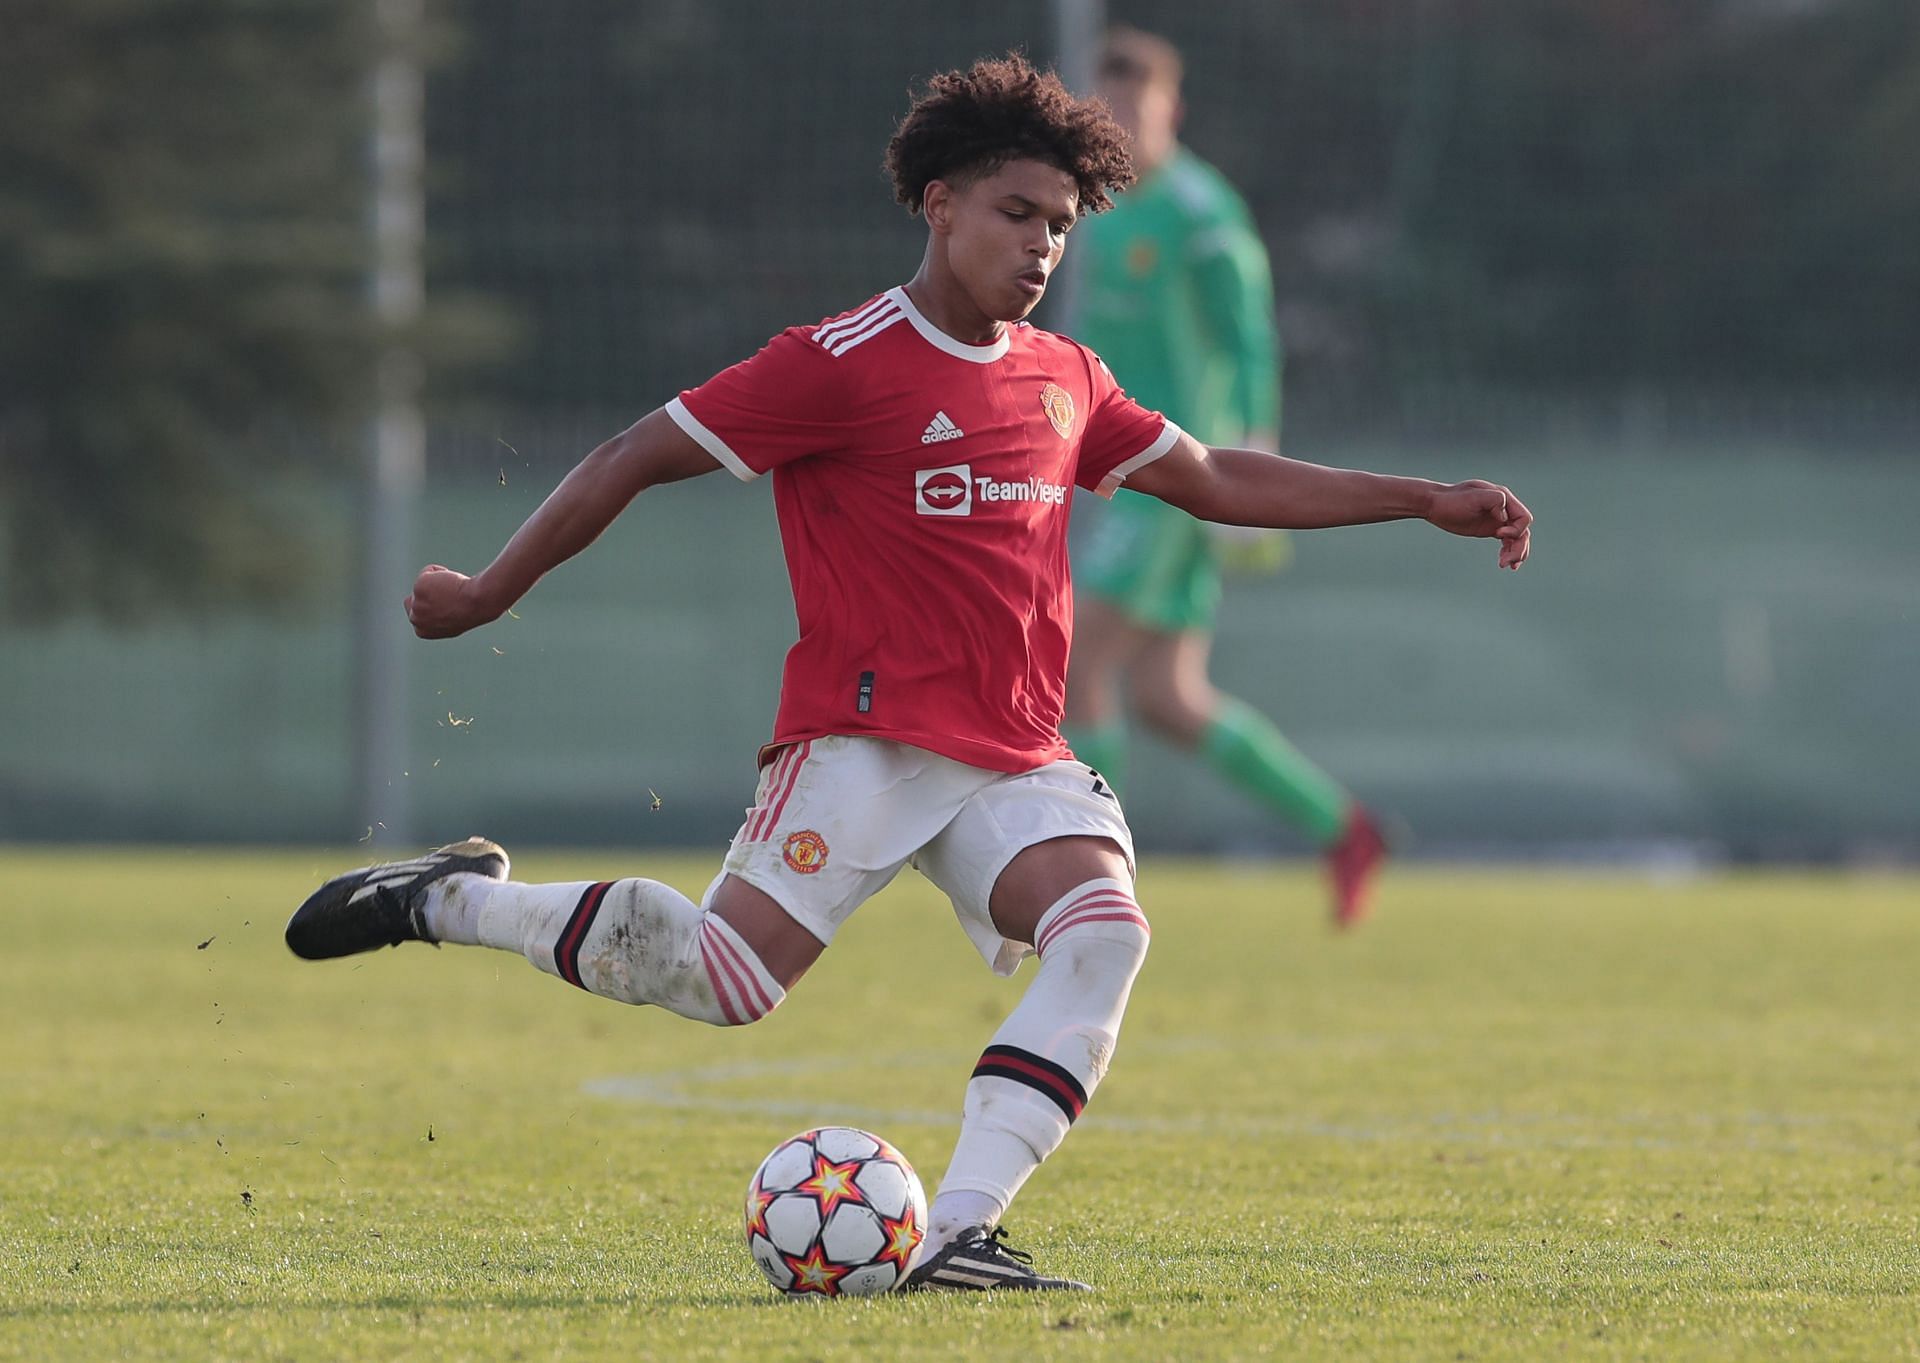 Shoretire became the youngest-ever player to feature in a UEFA Youth League game in 2018